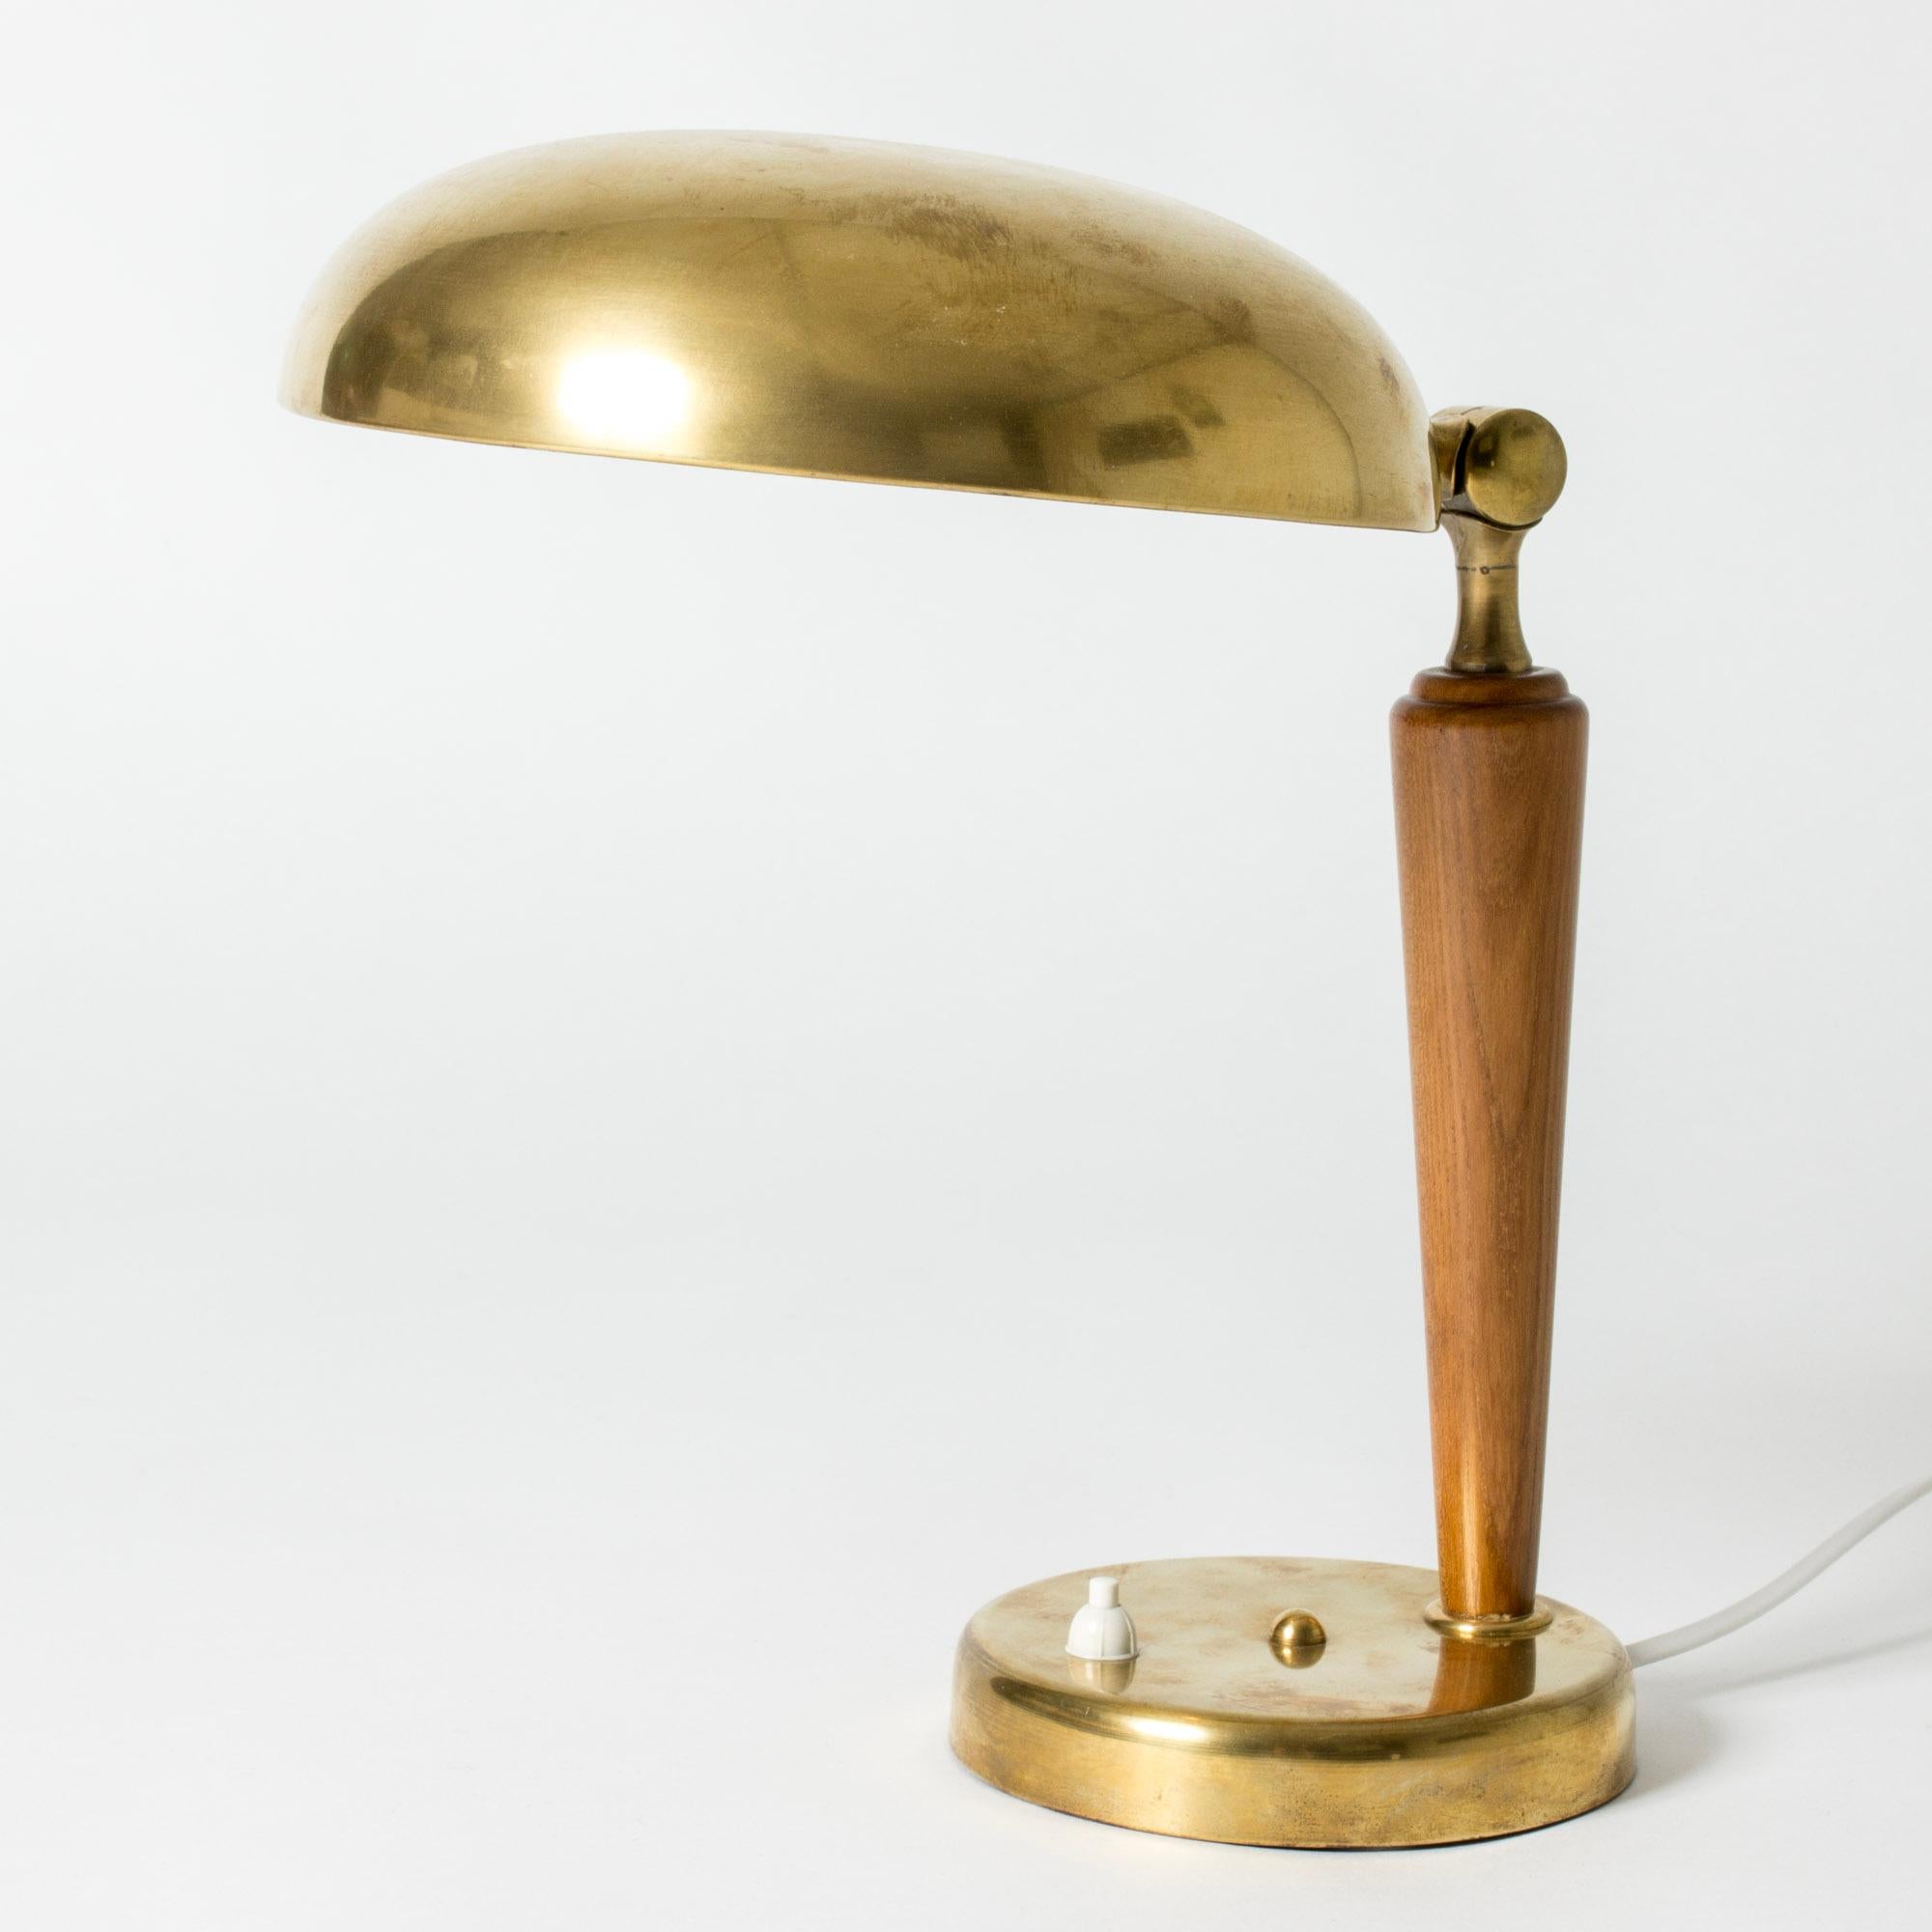 Cool Swedish Modern table or desk lamp, made from brass with a wood handle. Rounded, functionalist forms.